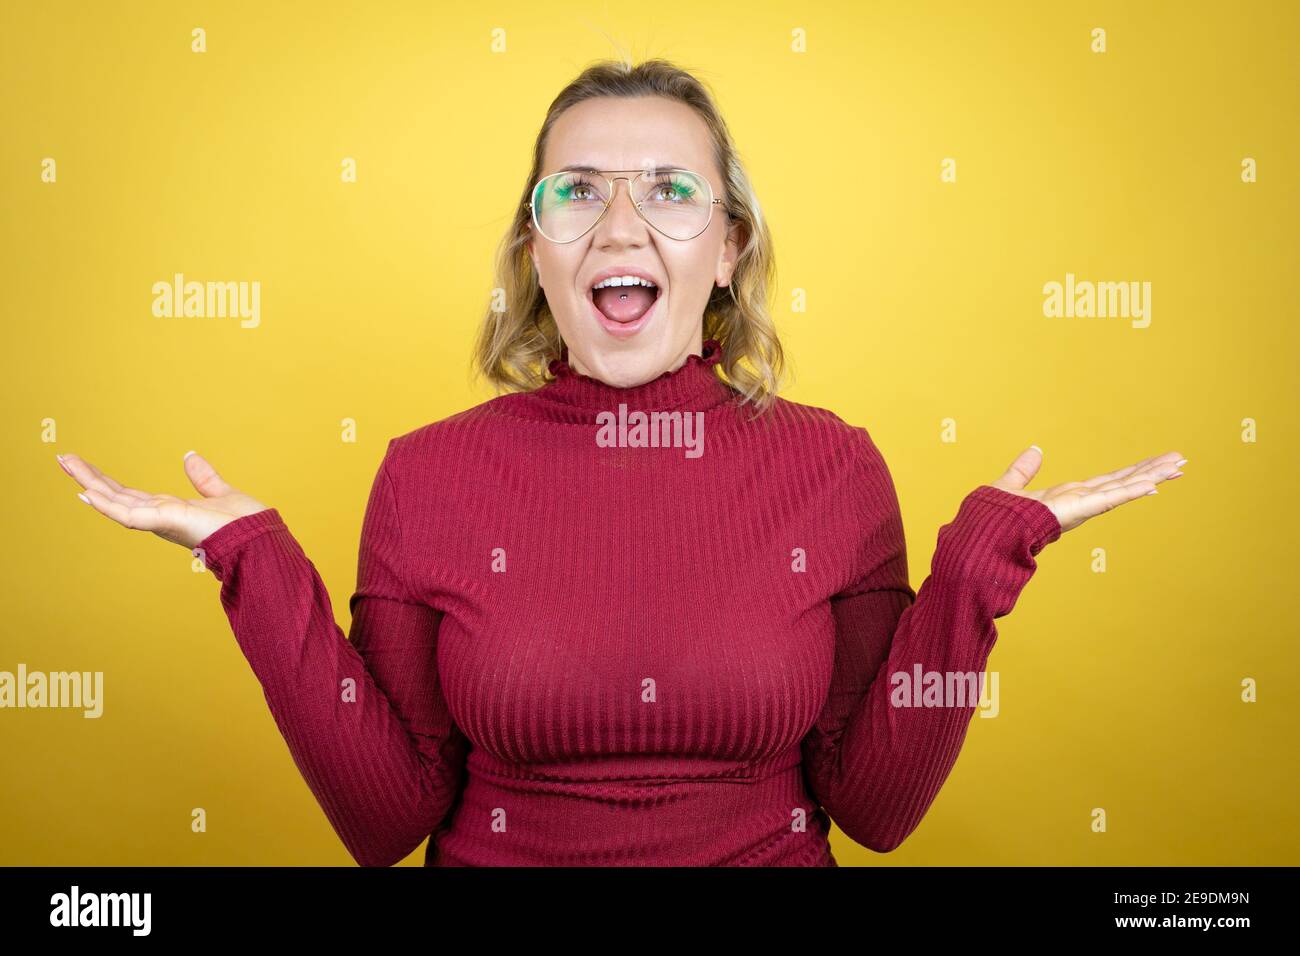 Young caucasian woman wearing casual red t-shirt over yellow background ...